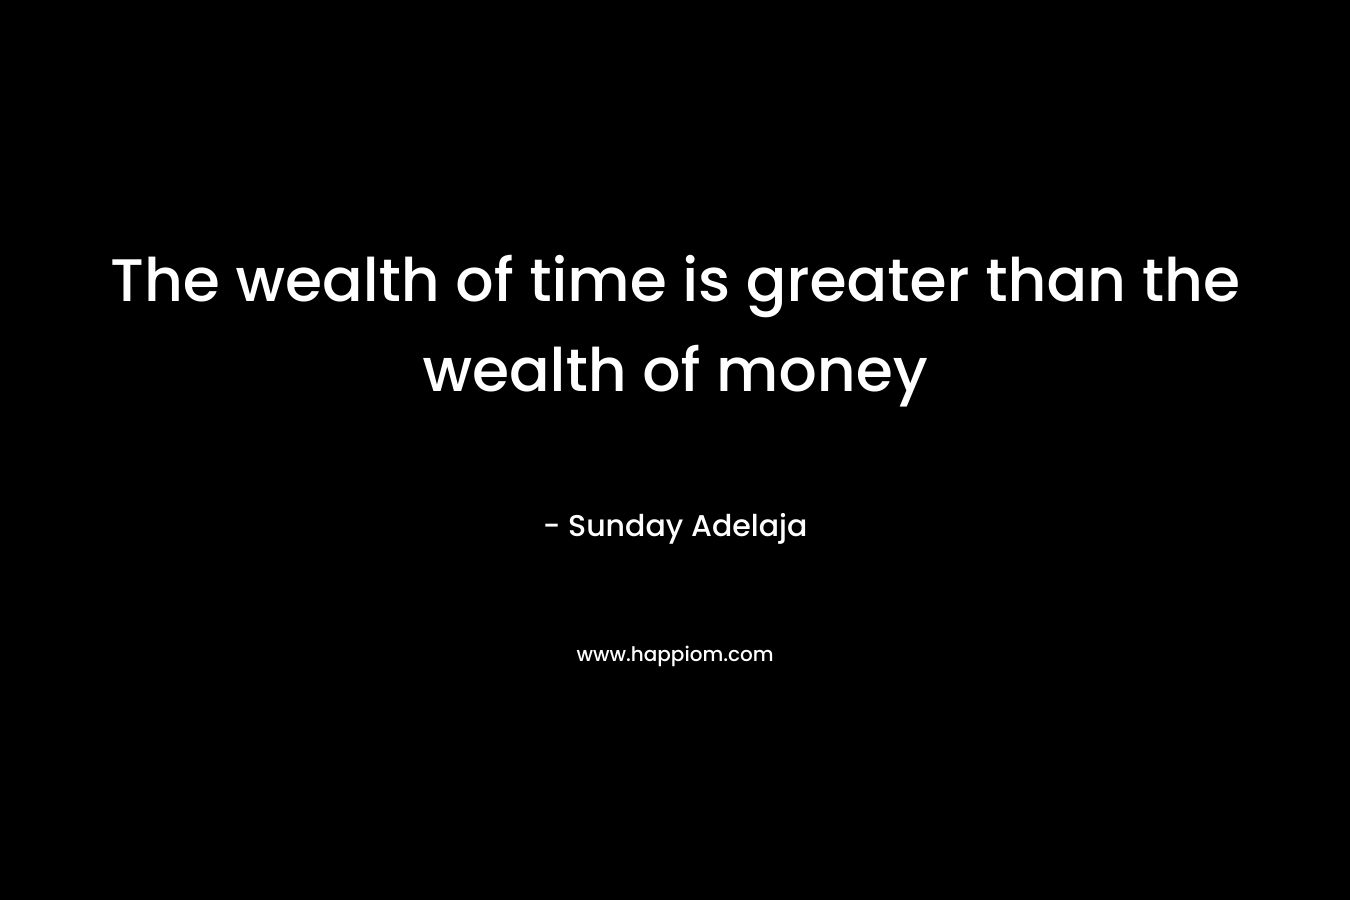 The wealth of time is greater than the wealth of money